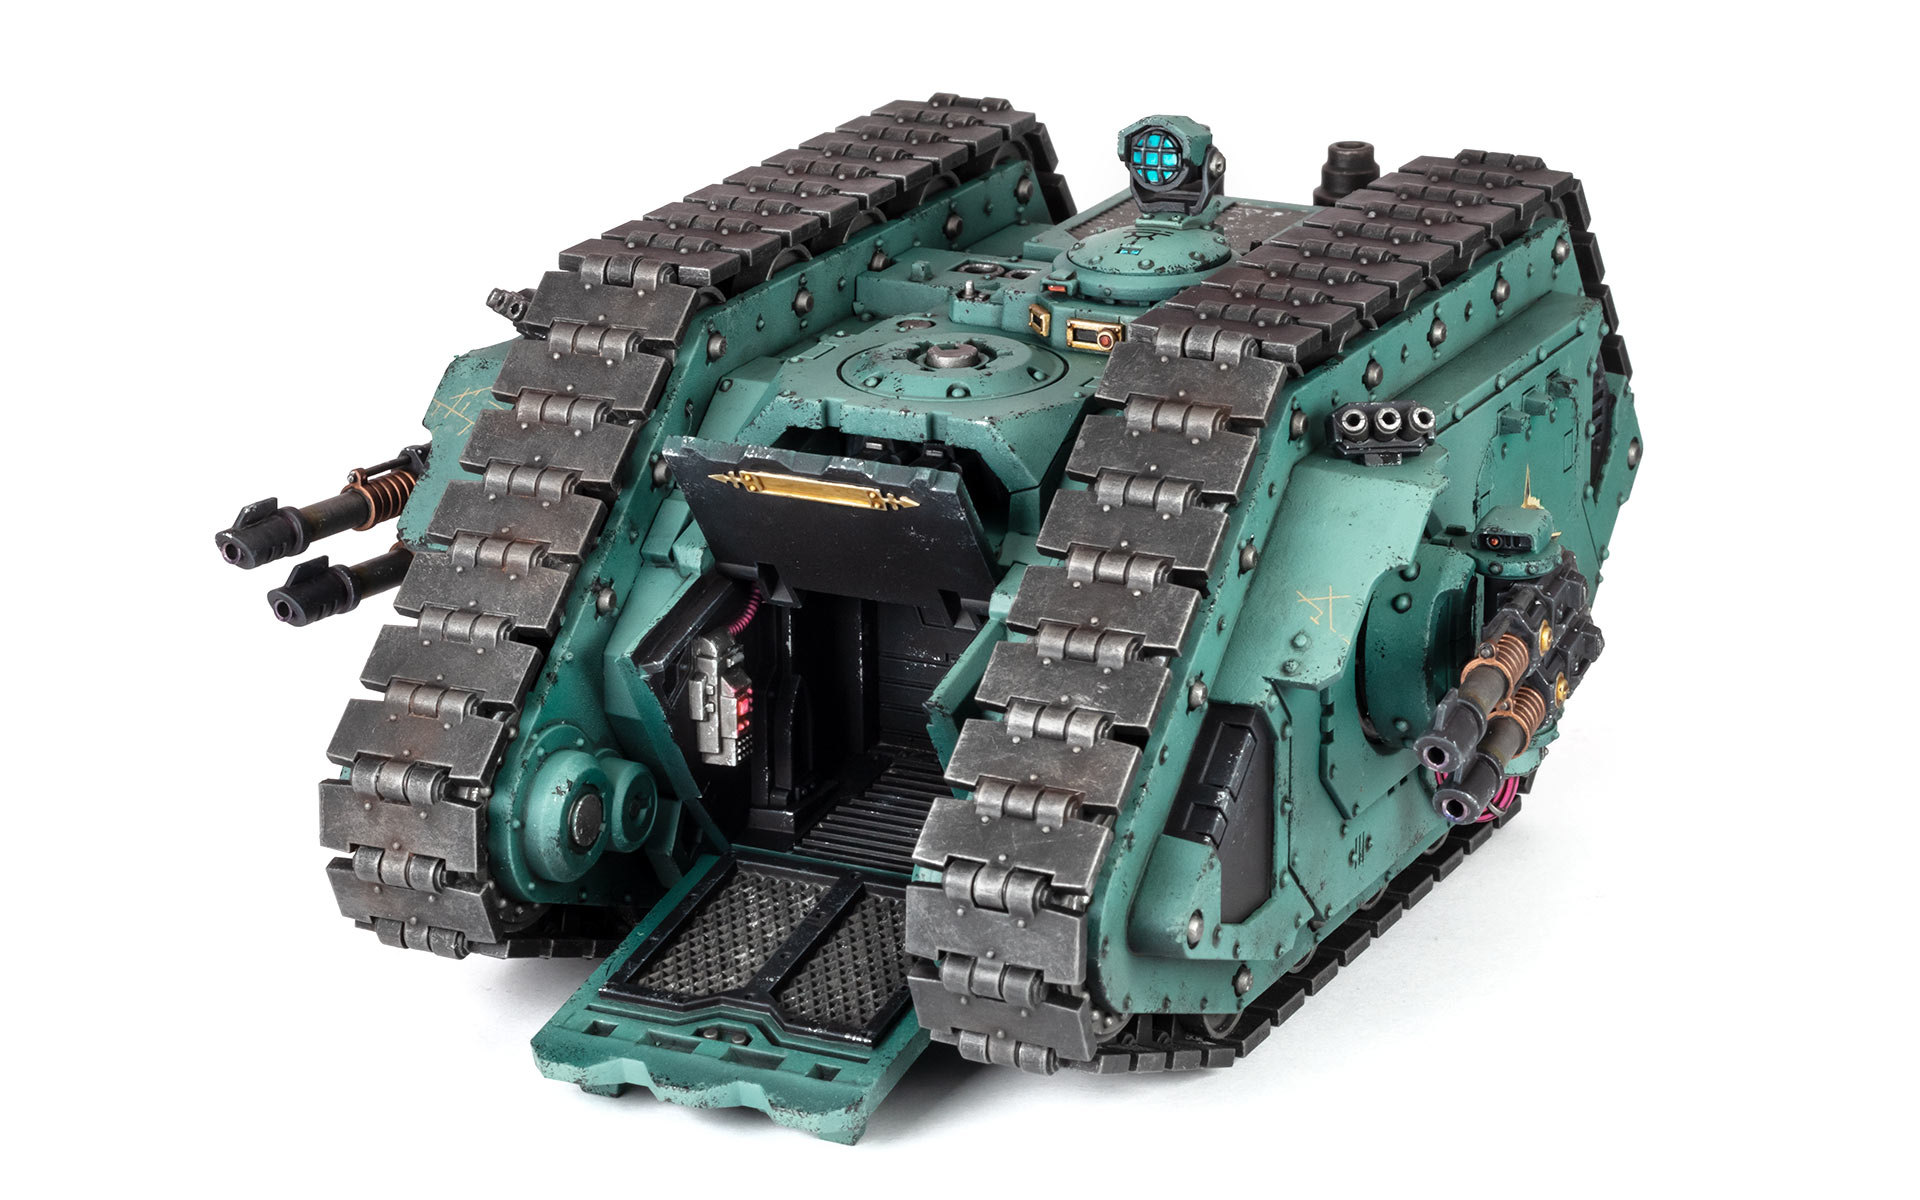 Sons of Horus Land Raider Proteus with an open front hatch, painted by Stahly